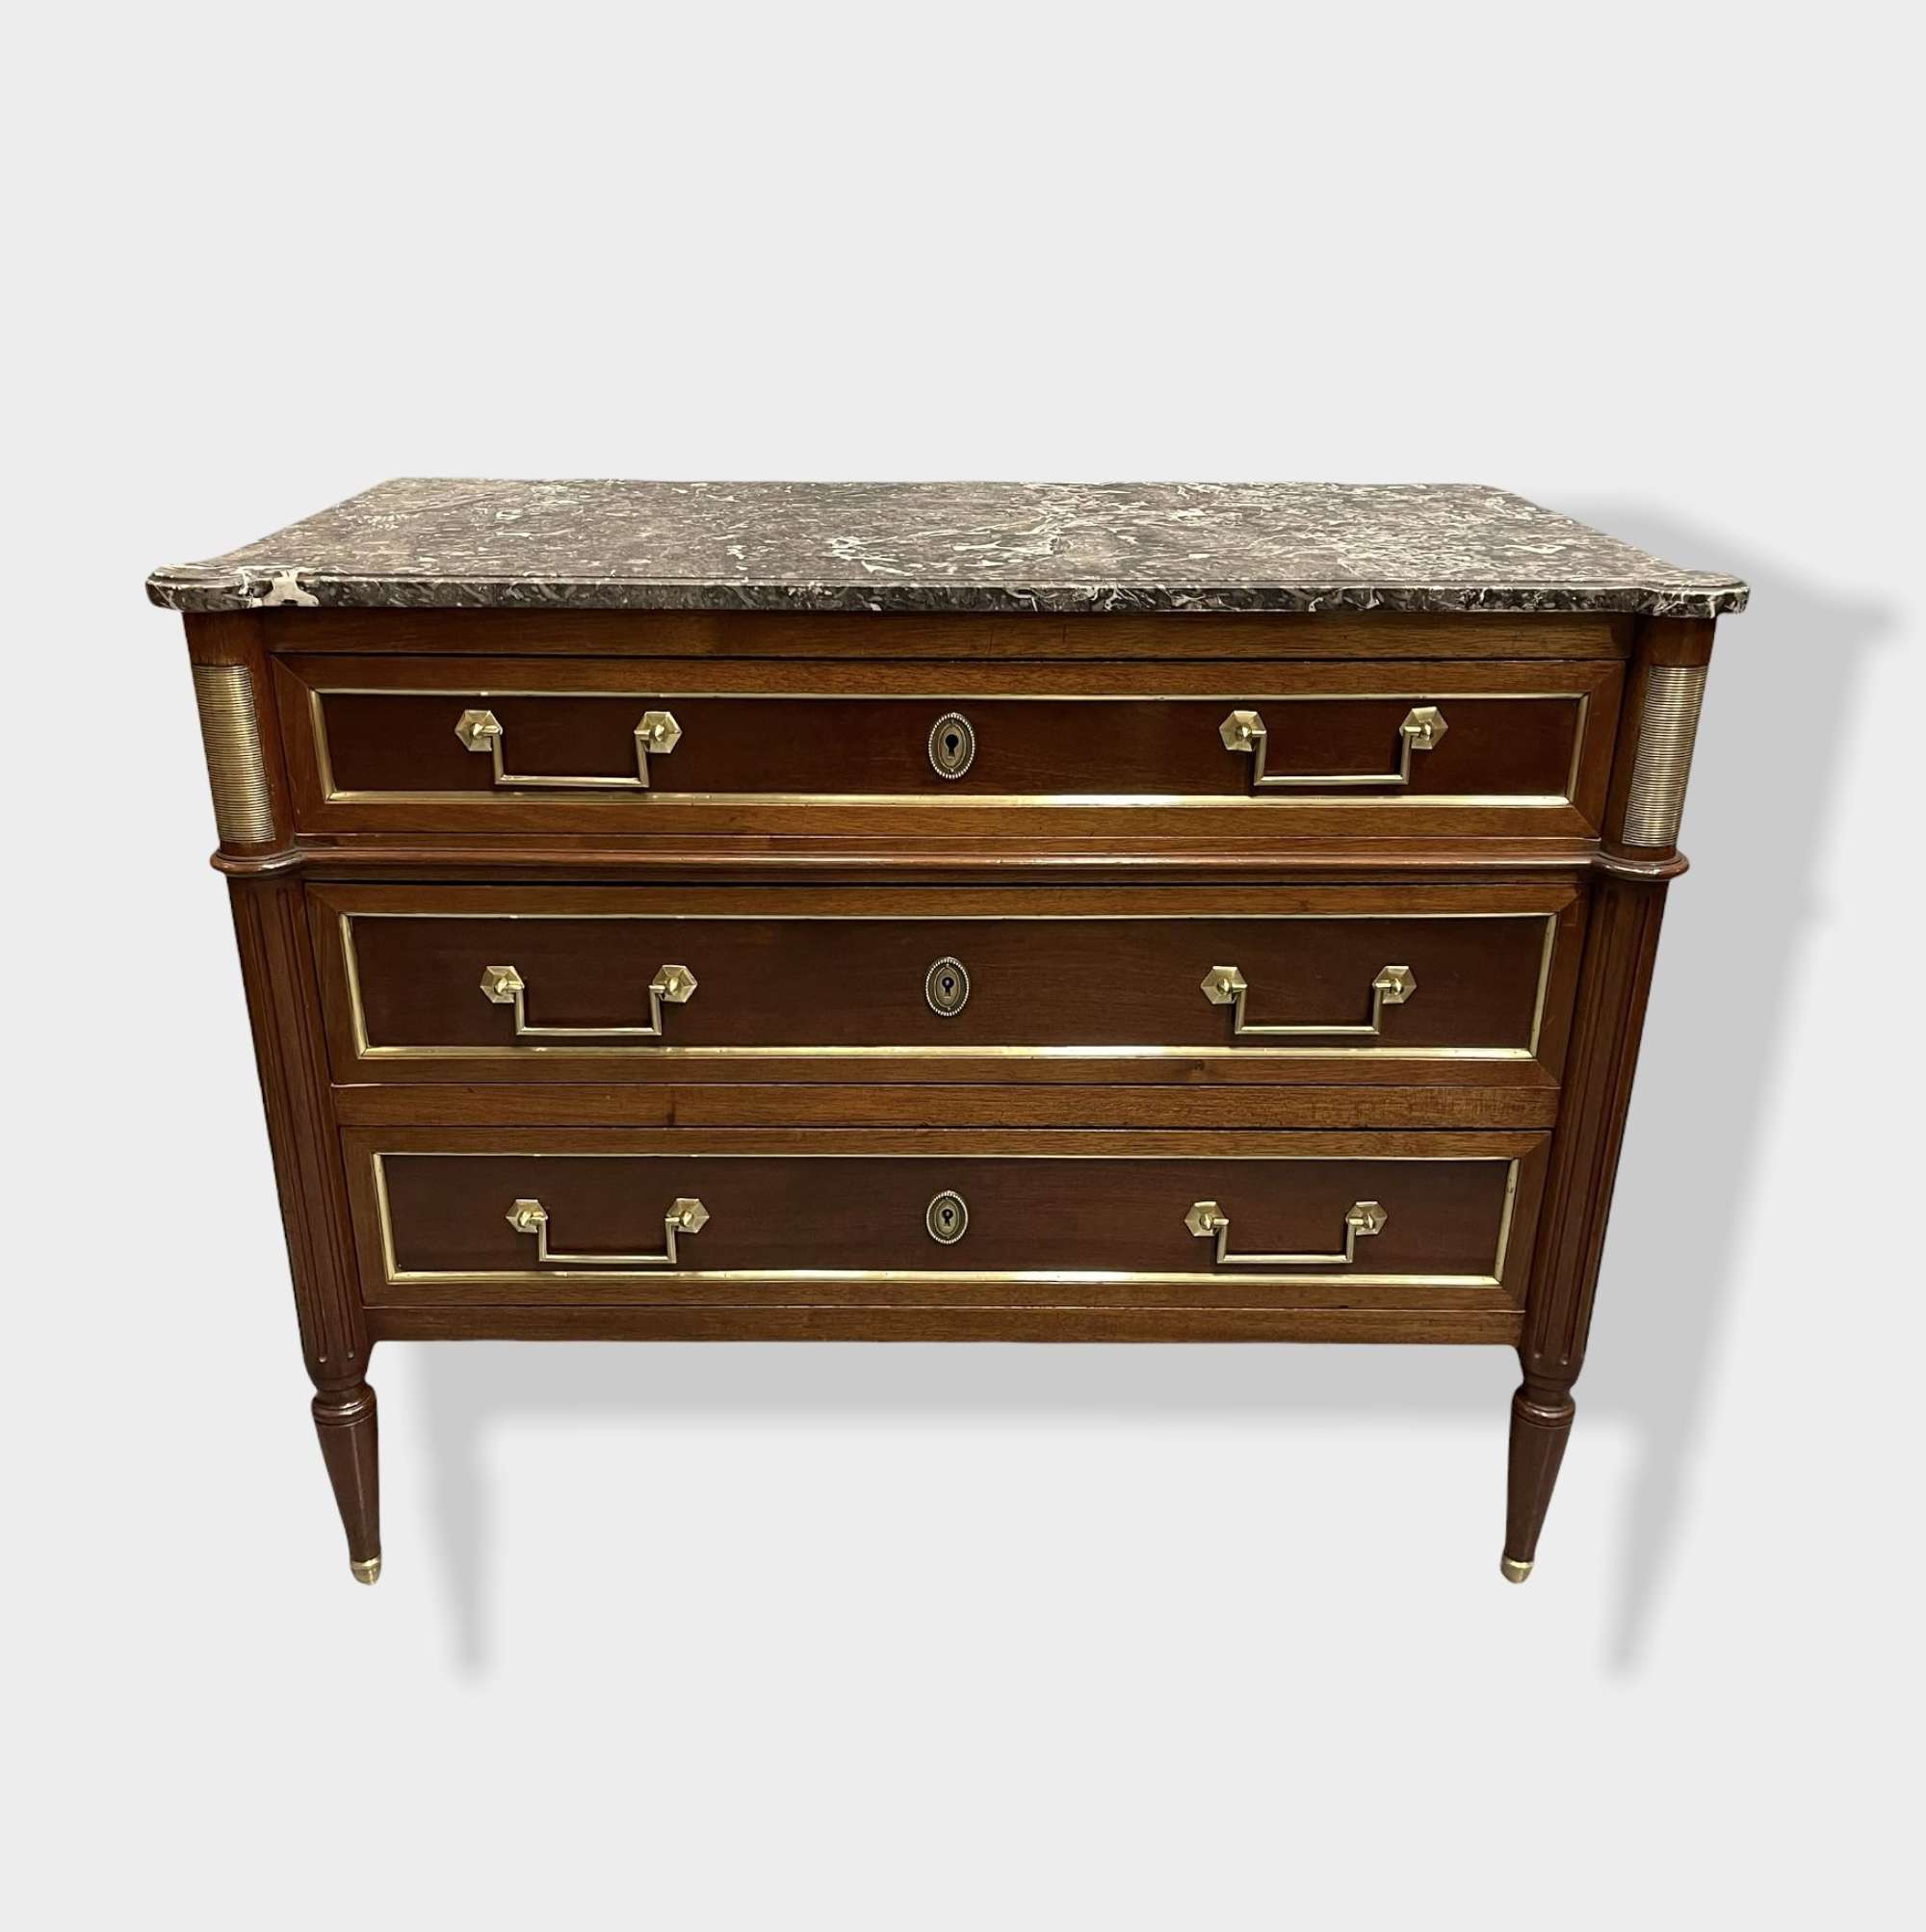 French Directoire Brass Inlaid Marble Top Antique Commode